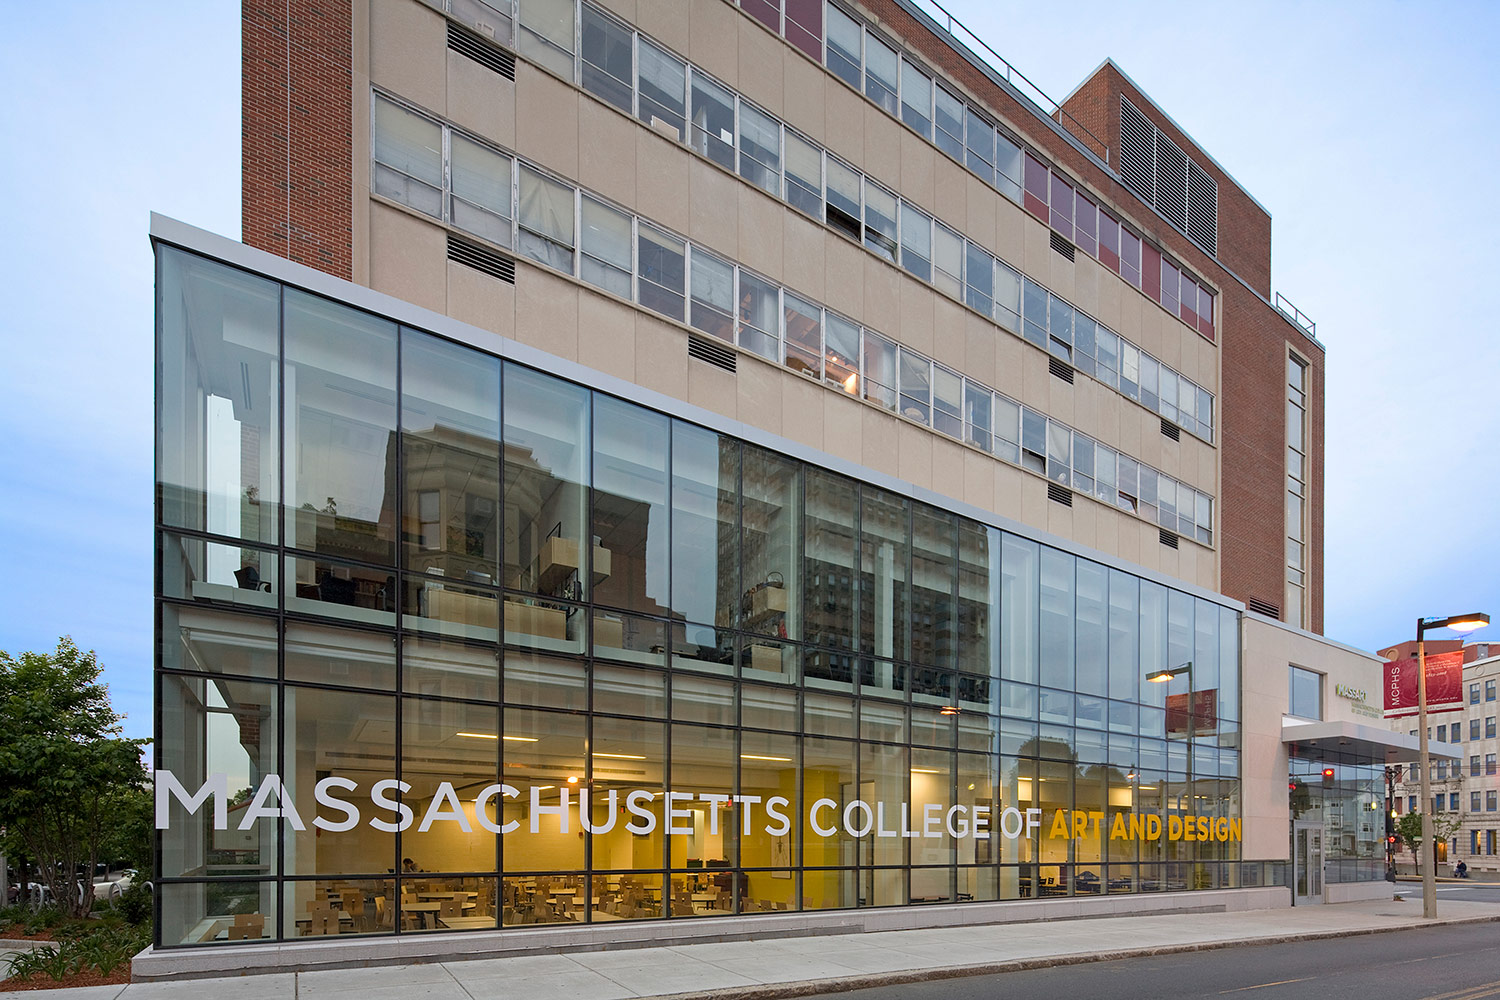 MassArt, Kennedy Campus Center Renovation and Expansion